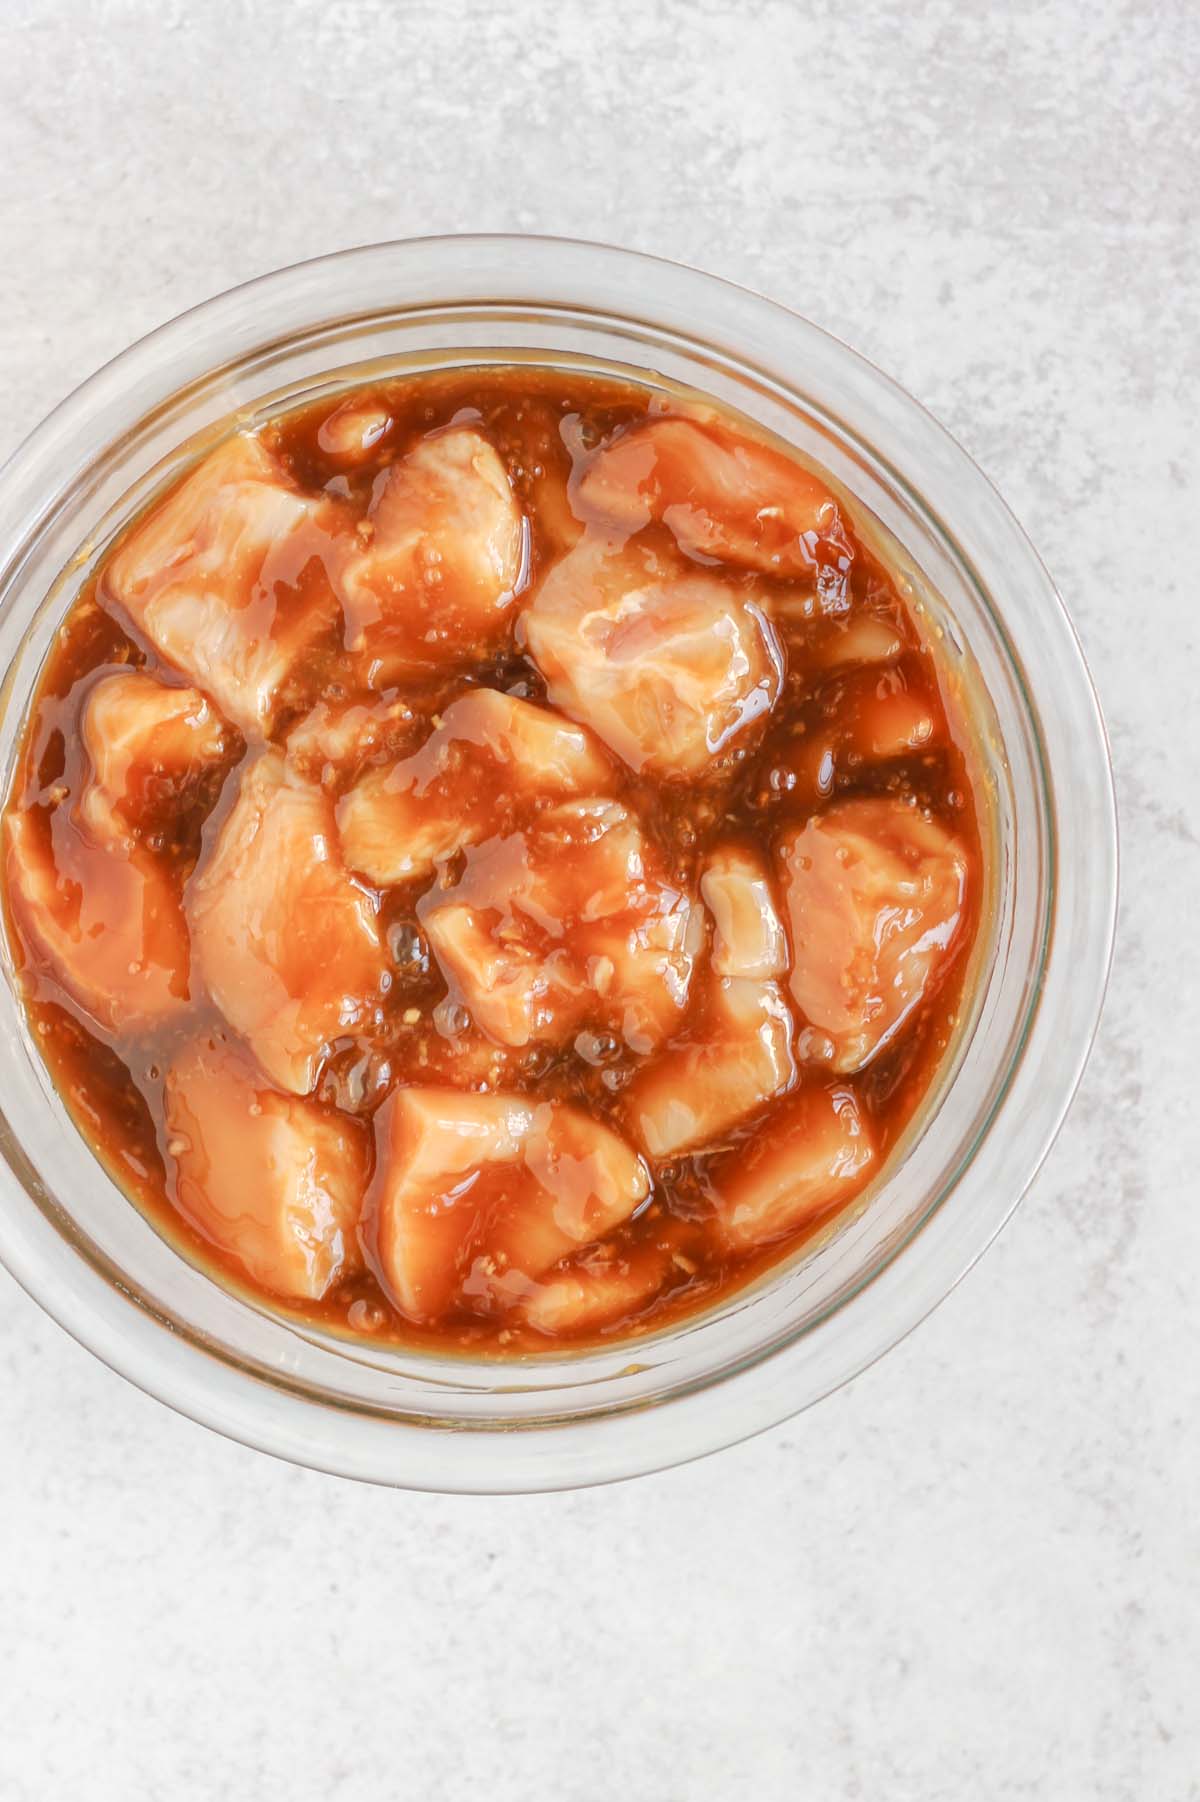 Cut up chicken pieces in a bowl with teriyaki sauce.